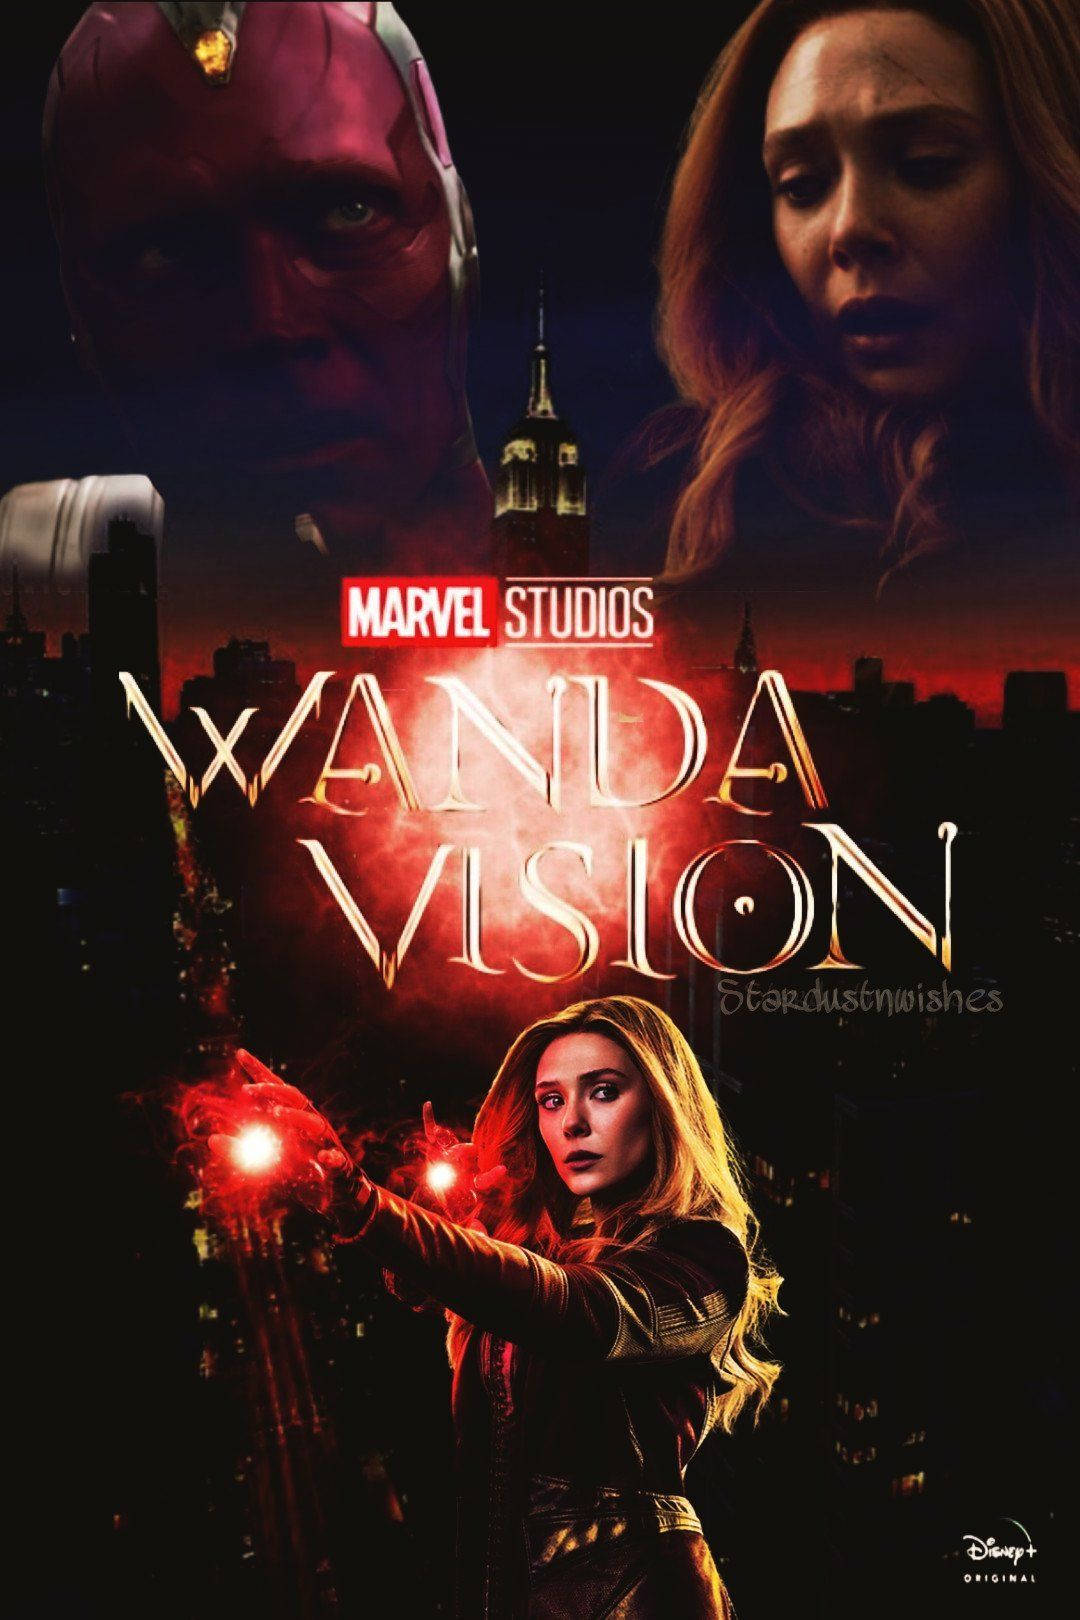 Wanda Maximoff and Vision take center stage in this fan-made poster for Marvel's Wandavision. Wallpaper